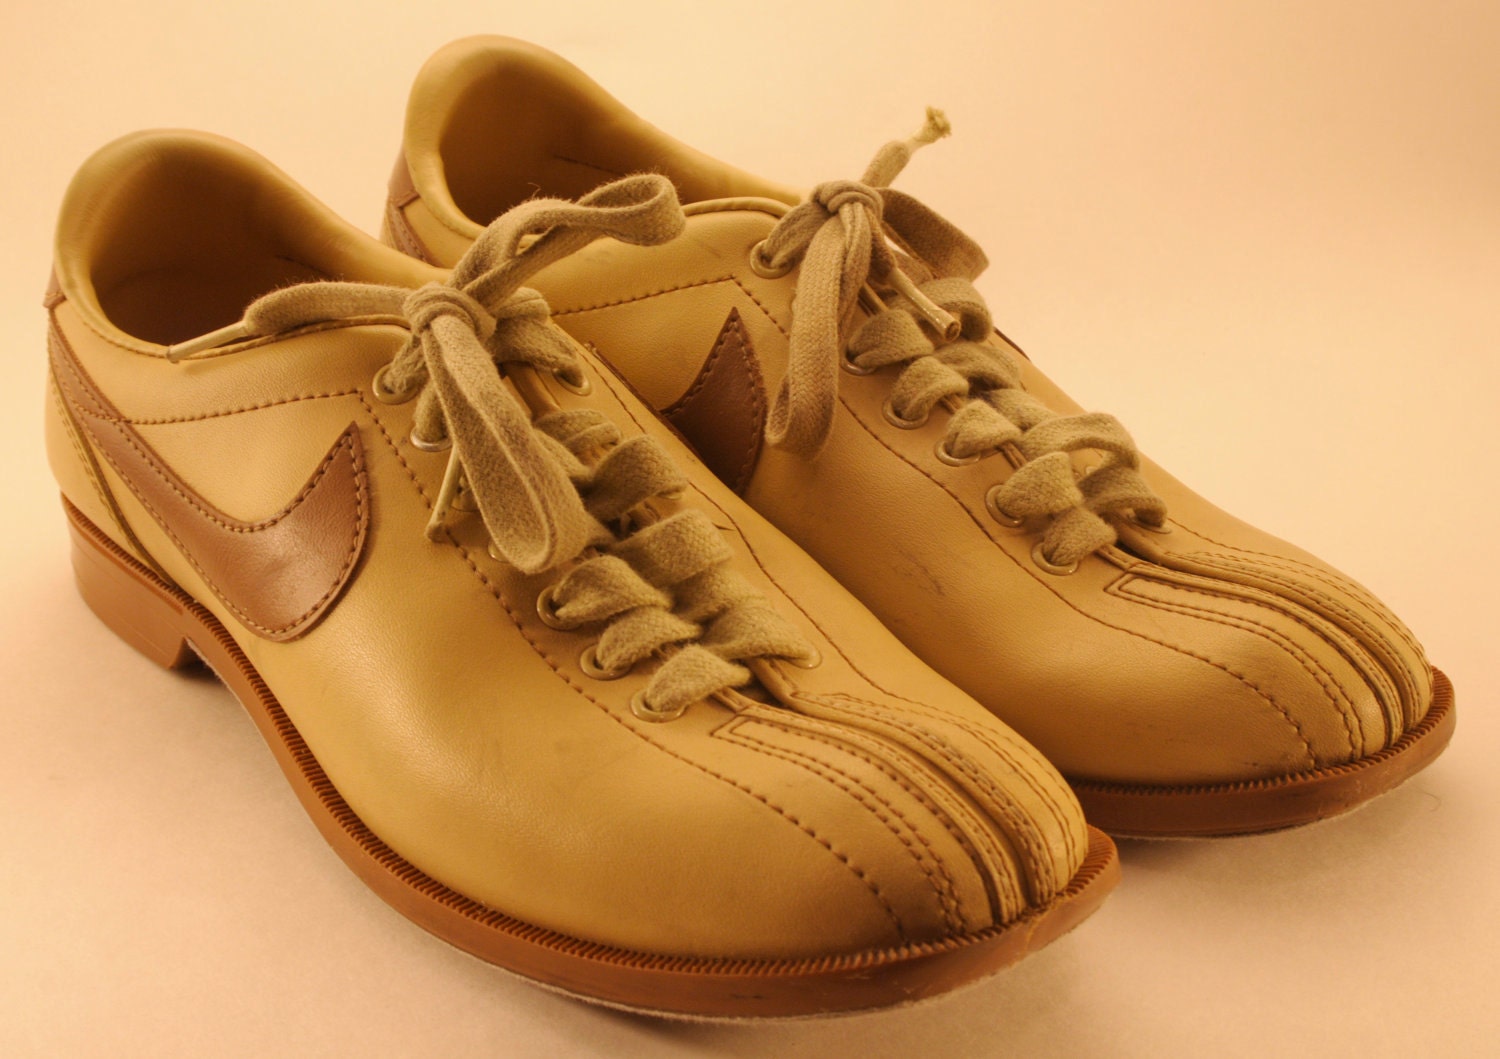 Vintage Early 80's Nike Bowling Shoes. Size Women's 8 by